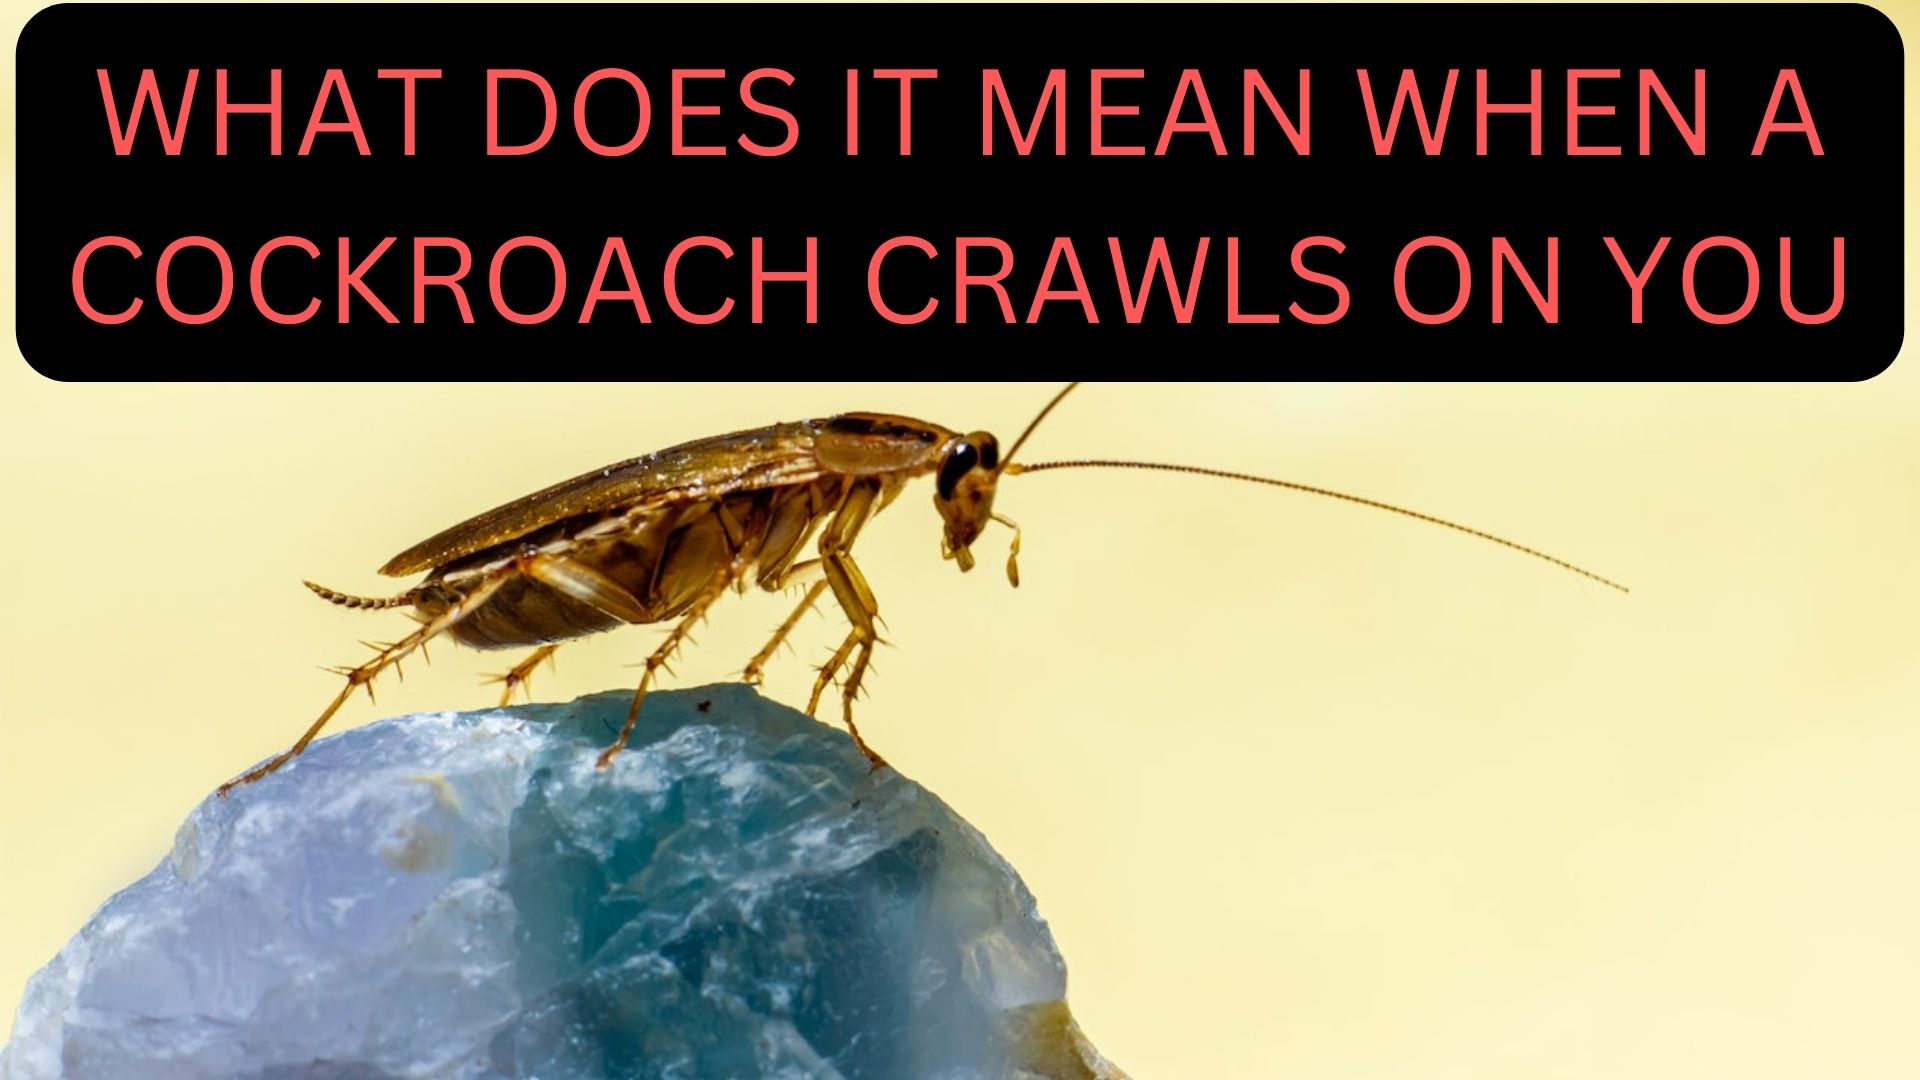 What Does It Mean When A Cockroach Crawls On You?